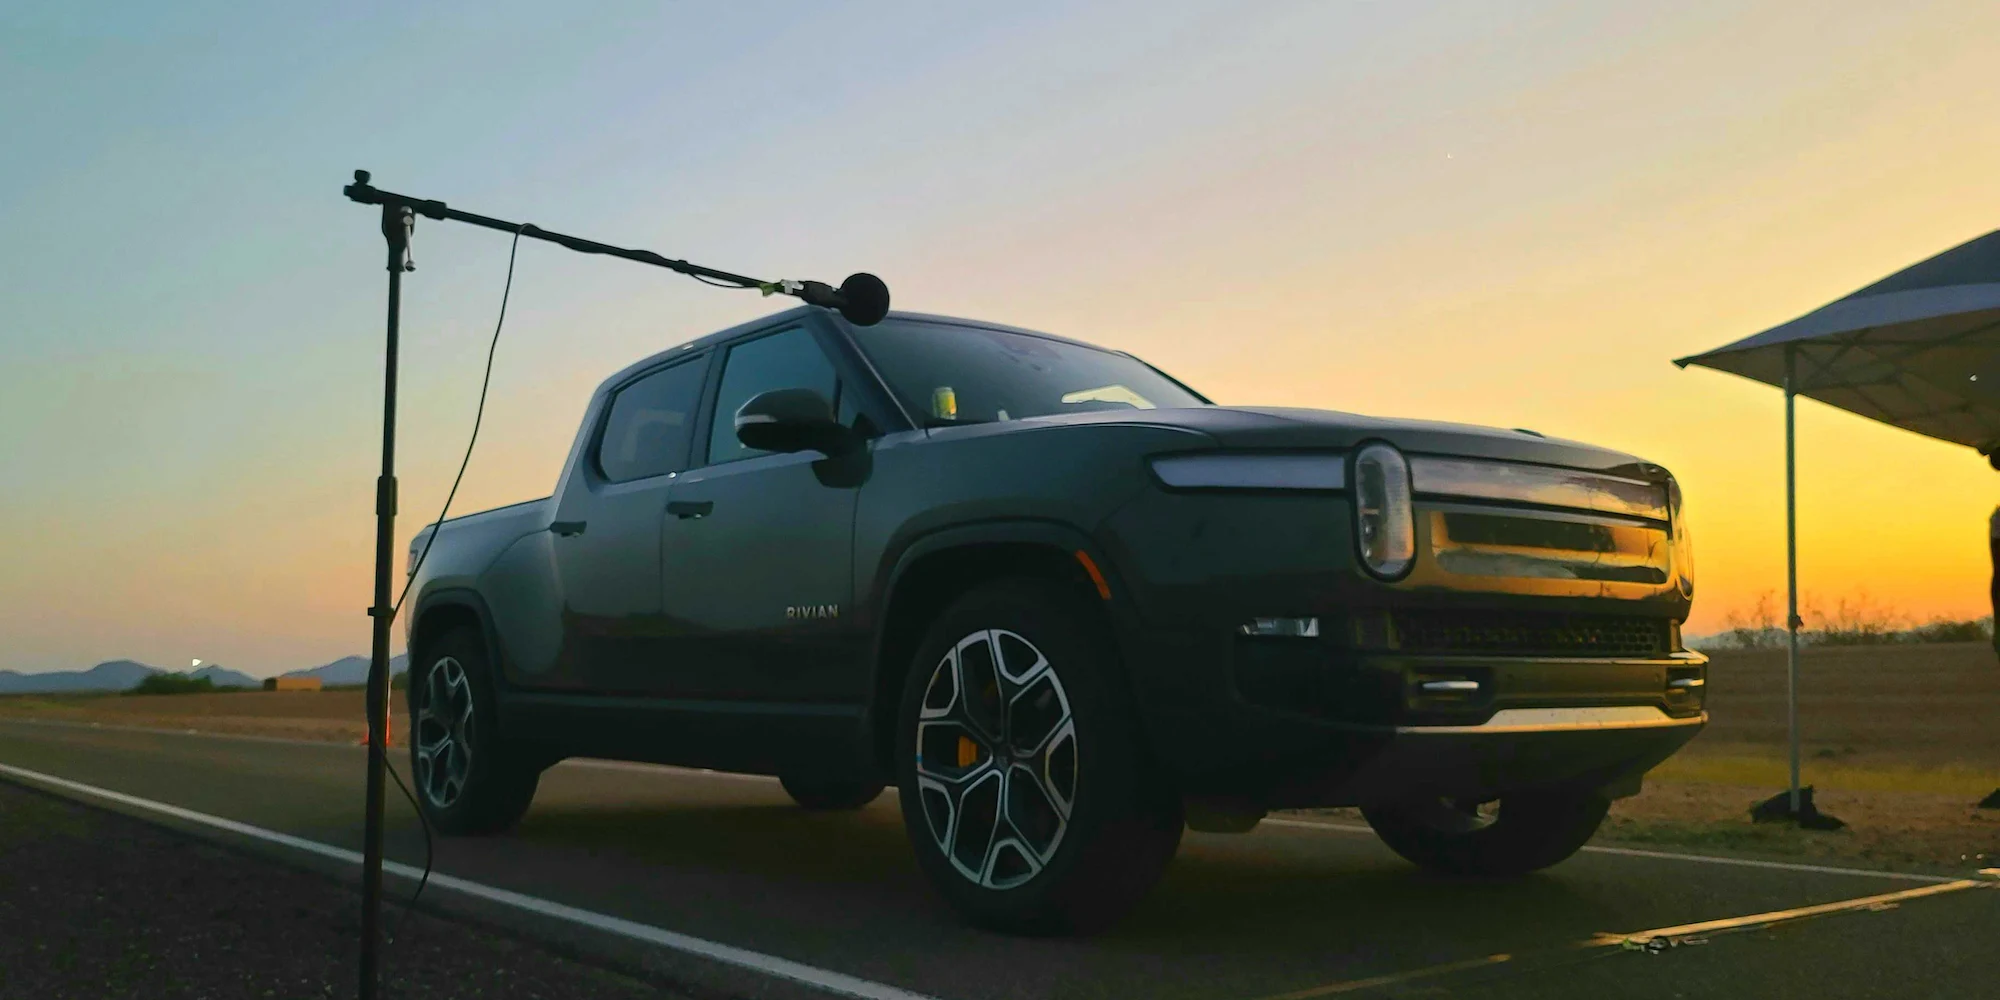 The Sounds of Rivian is based on the idea of soundscape ecology.